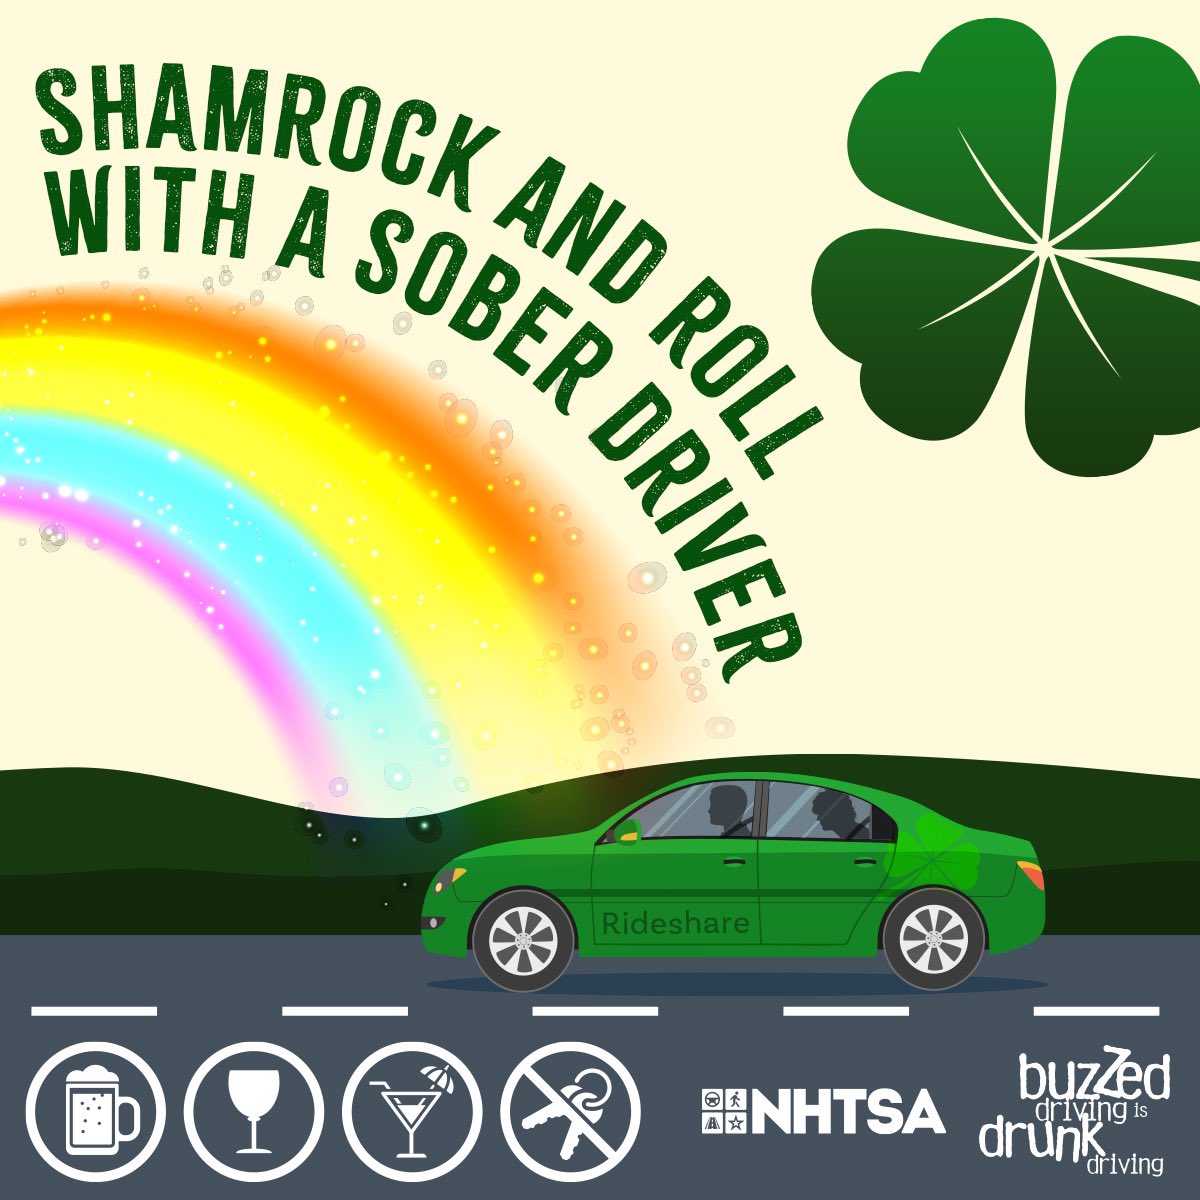 Make sure you’re getting a safe ride this St. Patrick’s Day! See you back on campus soon Bearcats!☘️